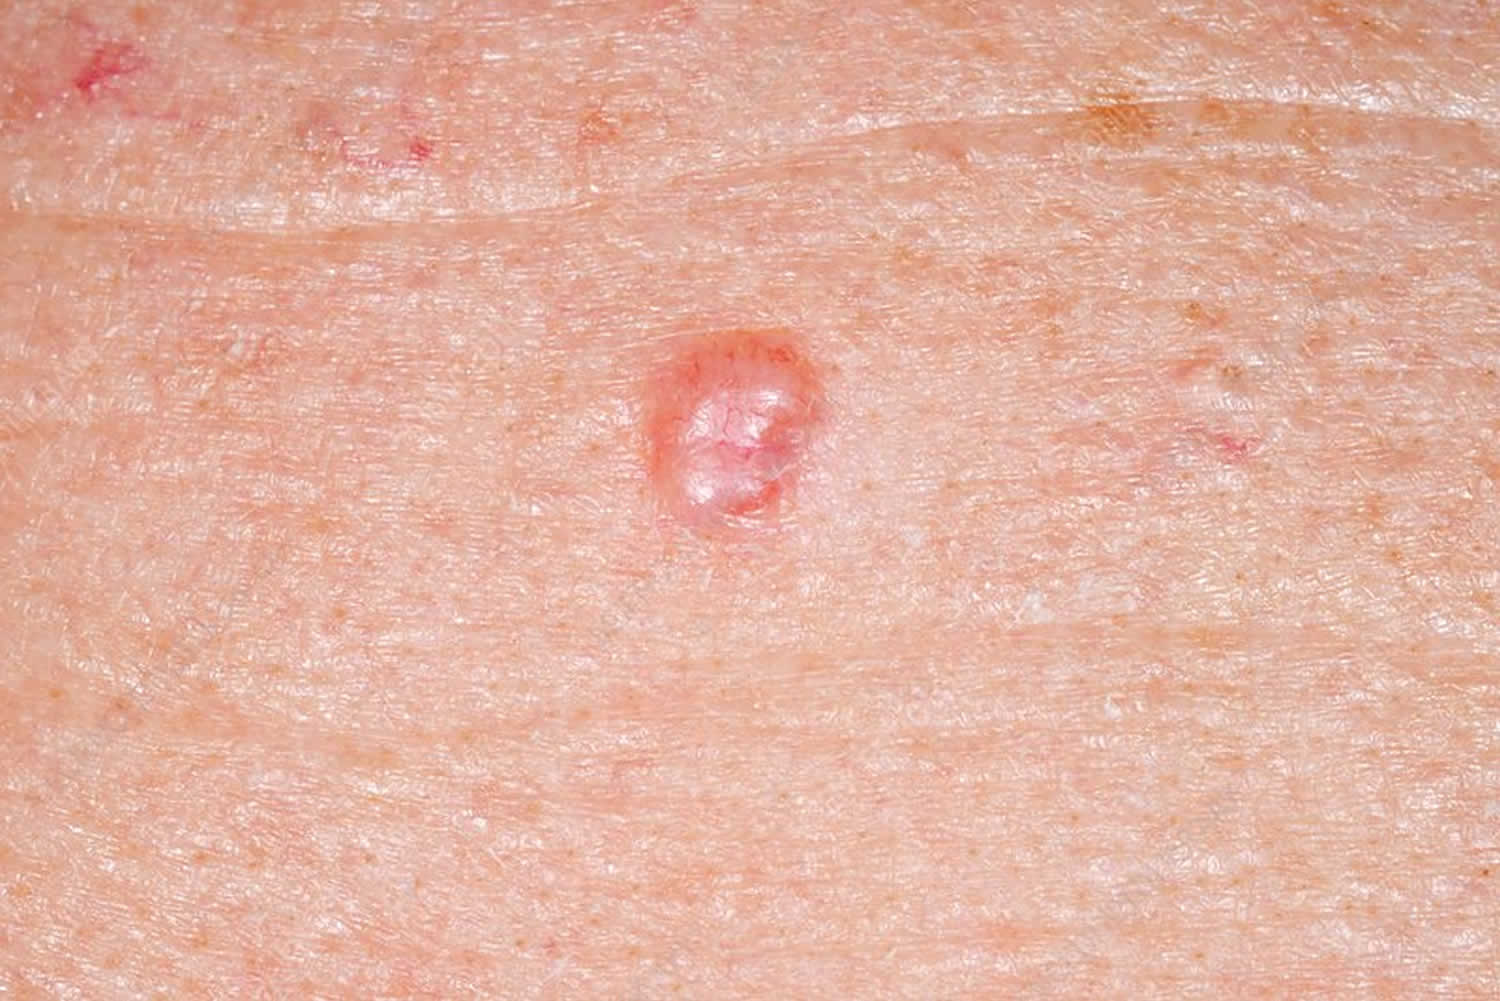 Basal cell carcinoma in children